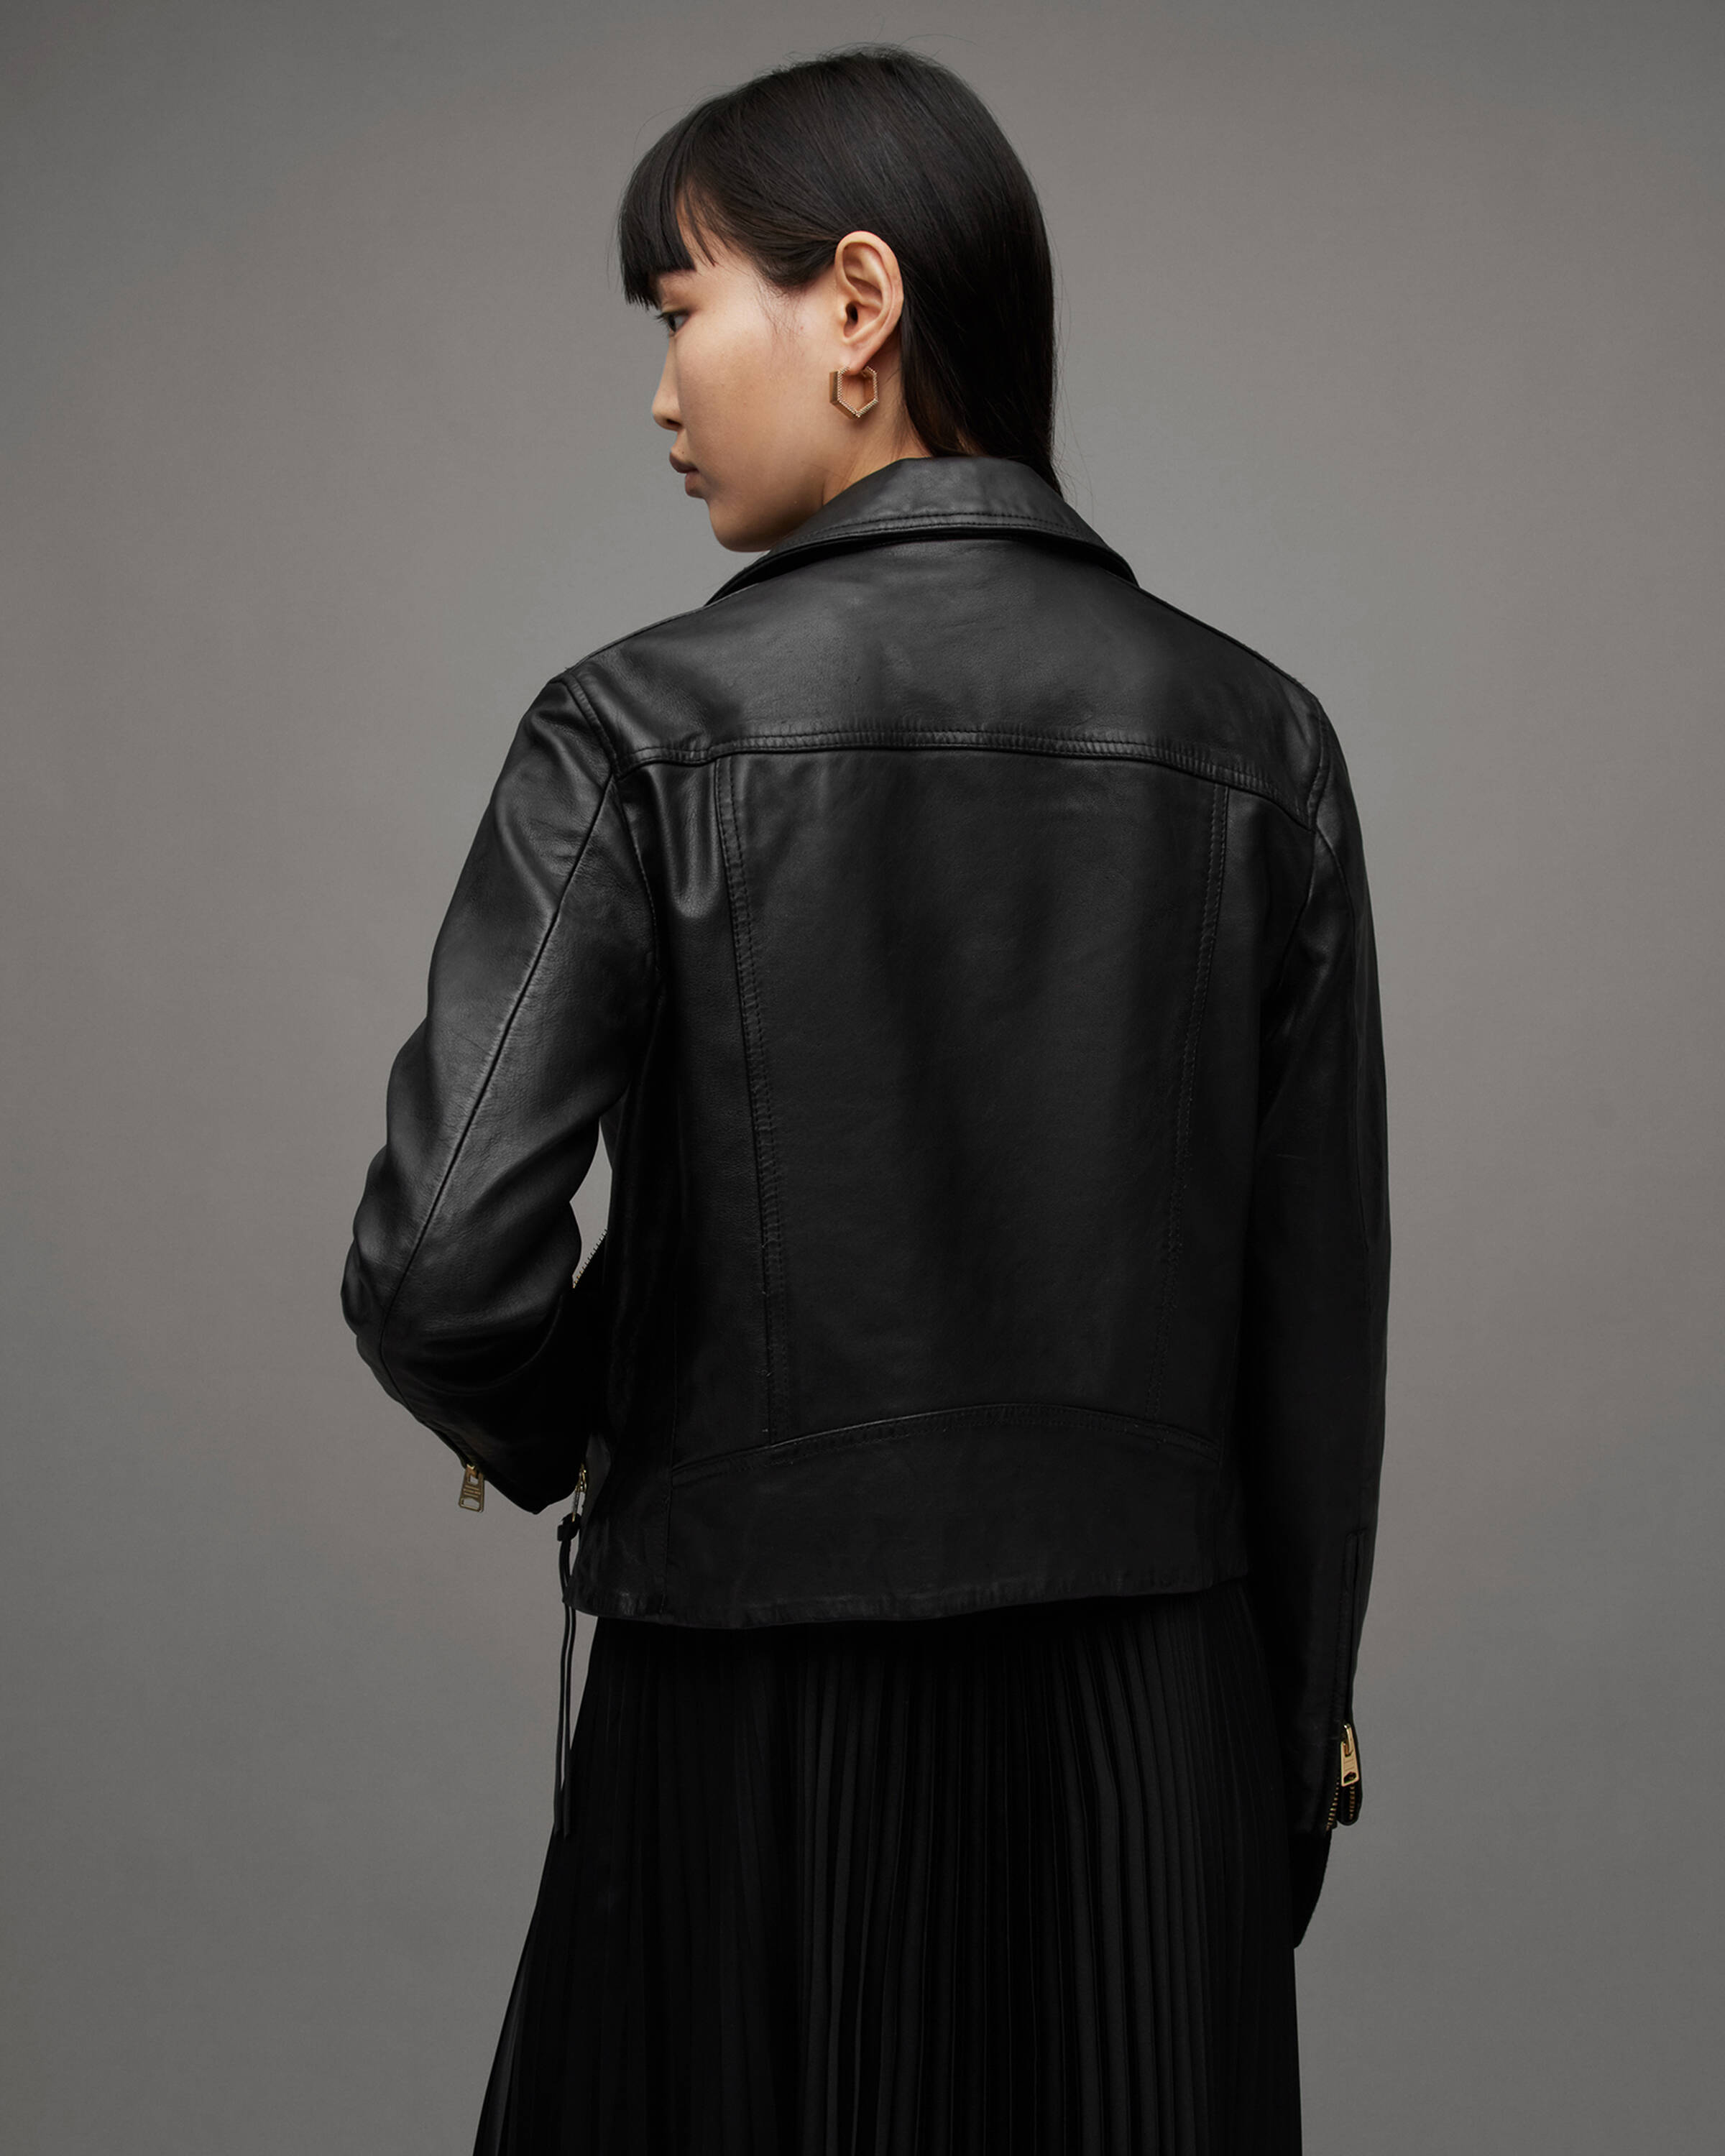 https://www.allsaints.com/on/demandware.static/-/Library-Sites-library-shared/default/dweb06bc30/images/feature-pages/Features/leather-size-guide/WW/30-08-23/dalby-back.jpeg